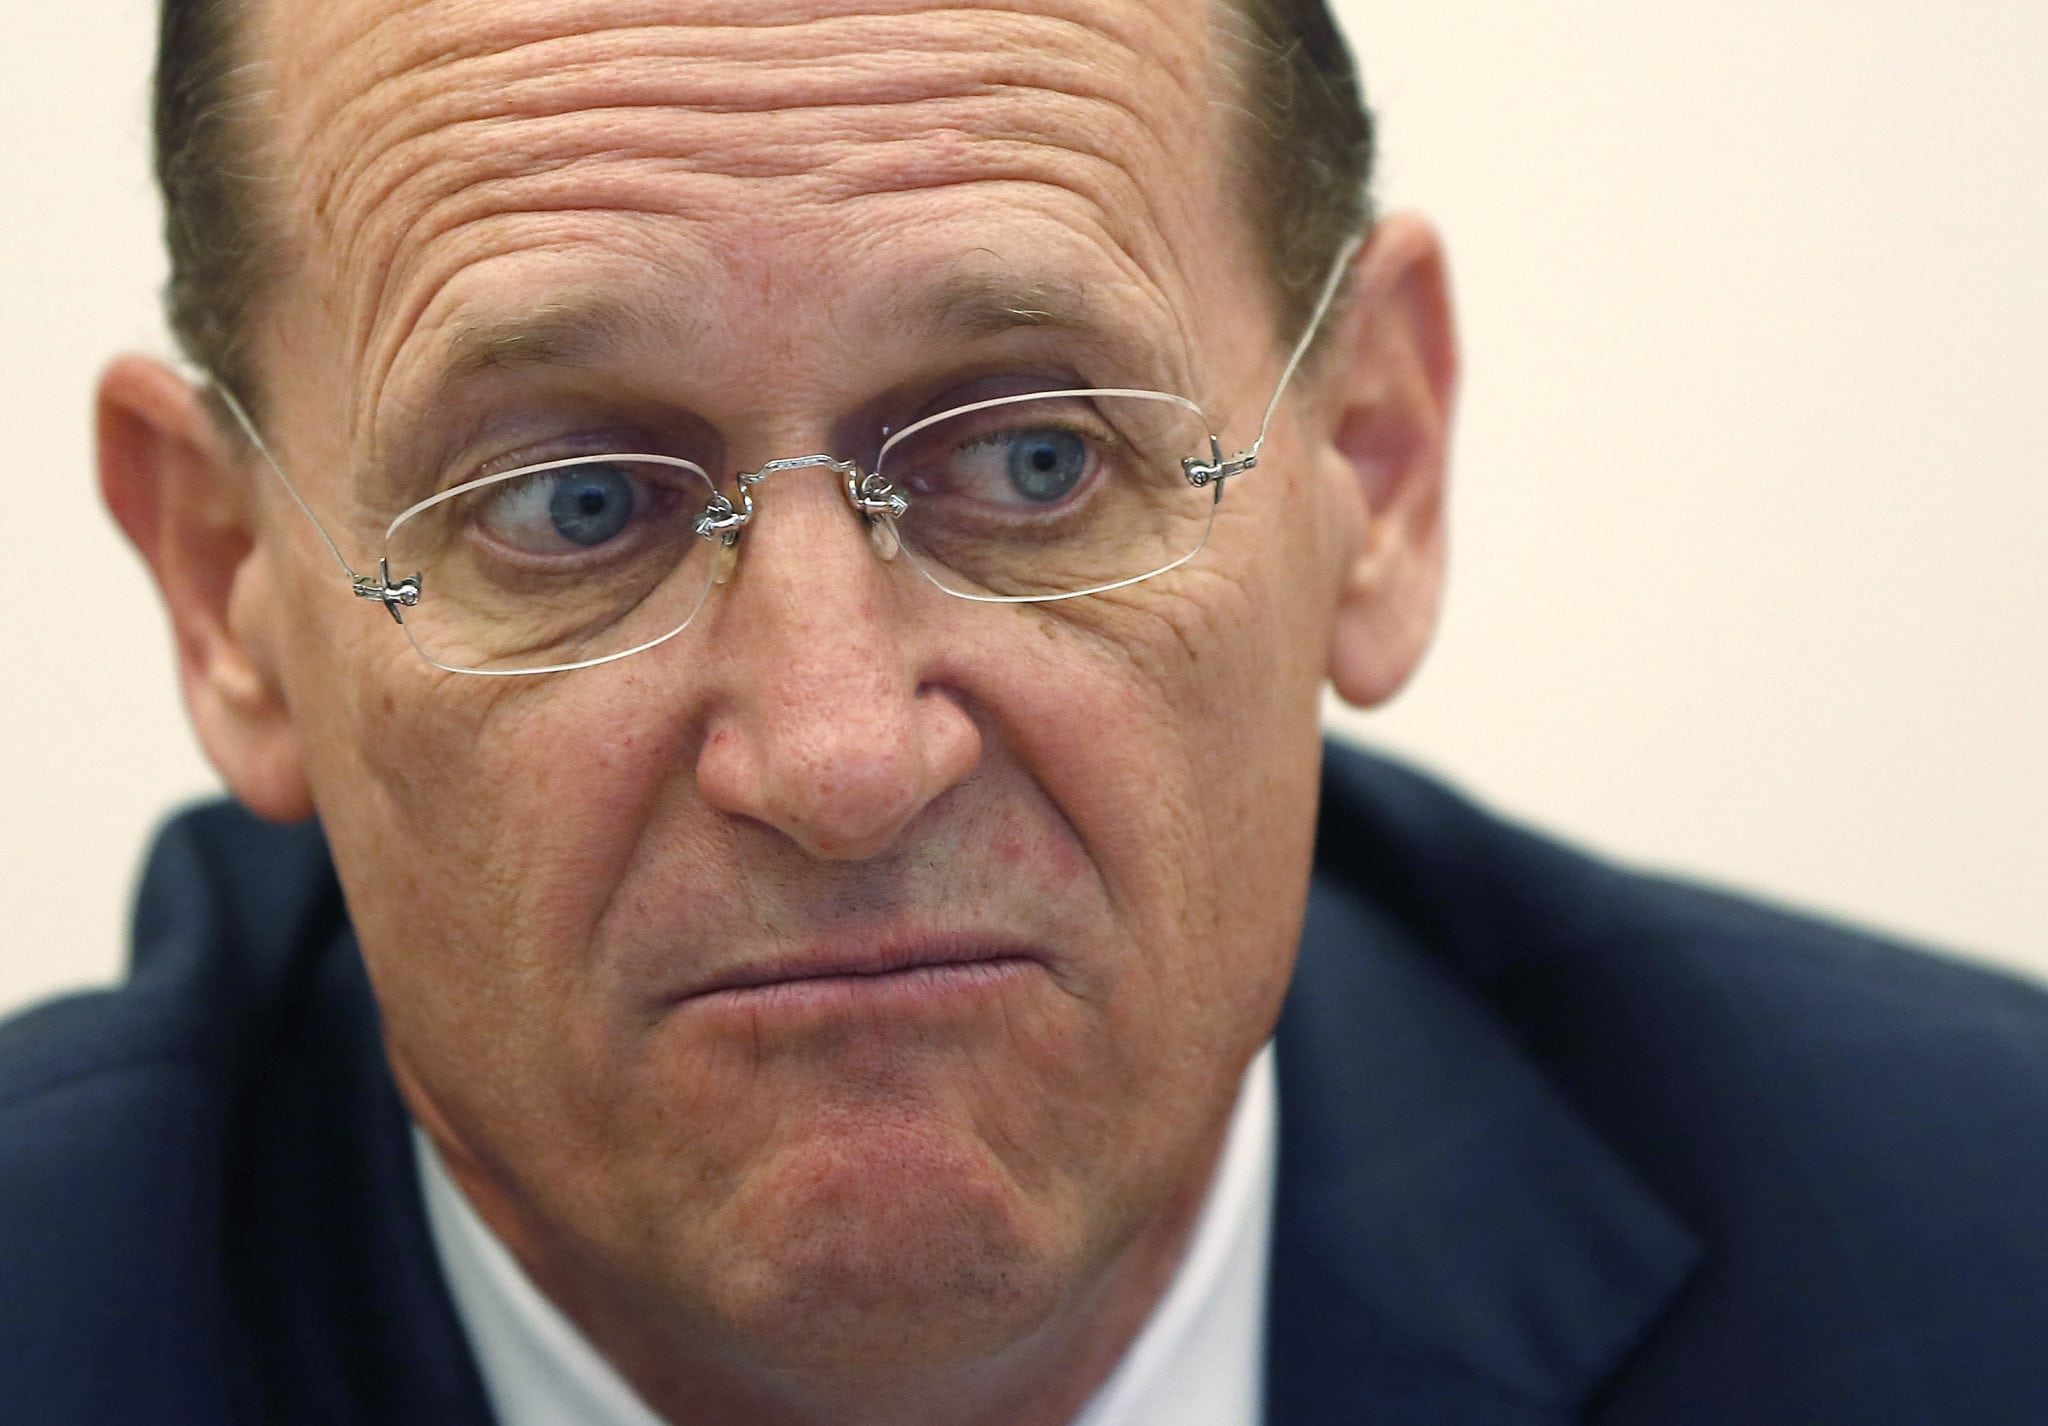 Delta Chief Executive Richard Anderson is seen during an interview in New York. 